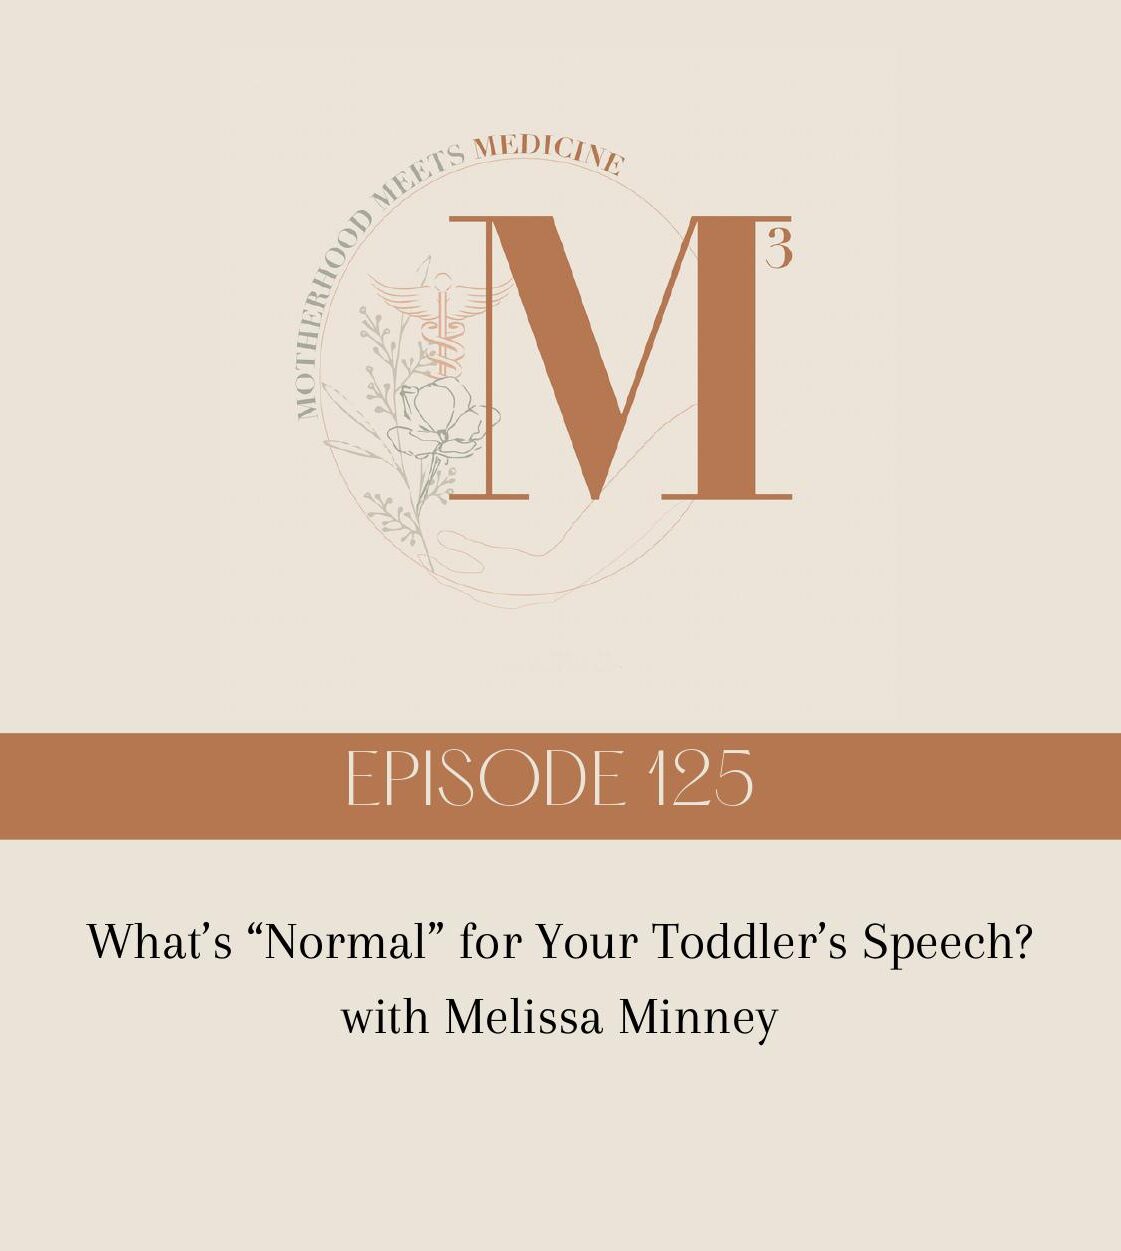 Episode 125: What’s “Normal” for Your Toddler’s Speech? with Melissa Minney